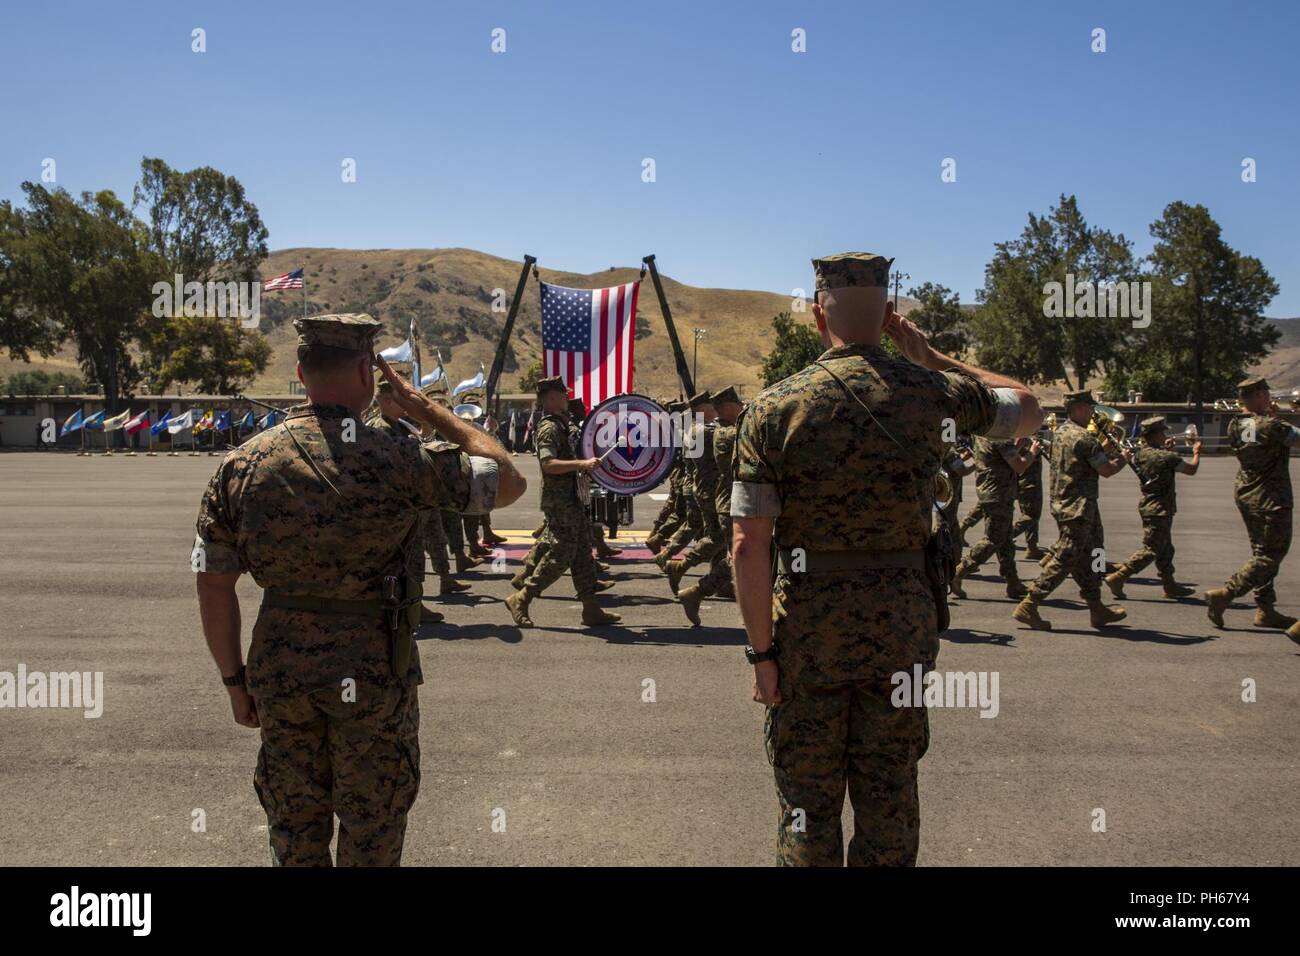 U.S. Marines with 2nd Battalion, 11th Marine Regiment, 1st Marine Division, participate in a change of command ceremony at Marine Corps Base Camp Pendleton, Calif., June 21, 2018. The change of command ceremony represented the official passing of authority from the offgoing commander, Lt. Col Patrick F. Eldridge, to the incoming commander, Lt. Col. Caleb Hyatt. Stock Photo